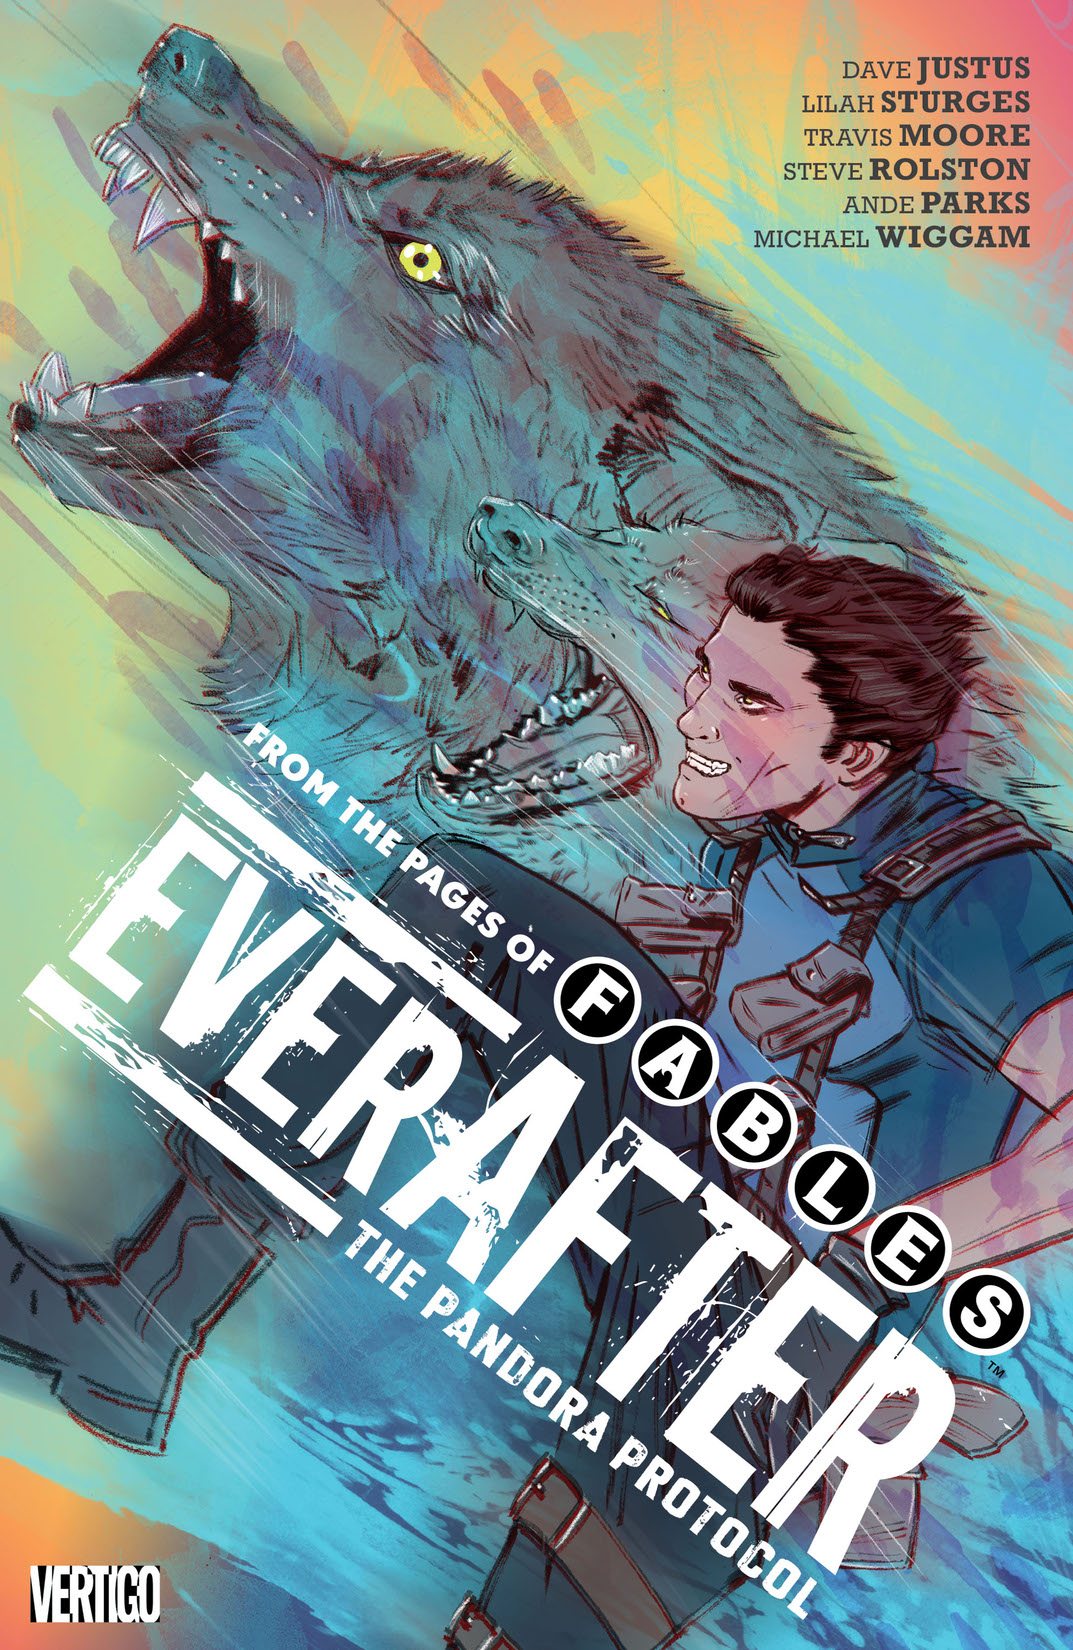 Everafter Vol. 1: The Pandora Protocol preview images